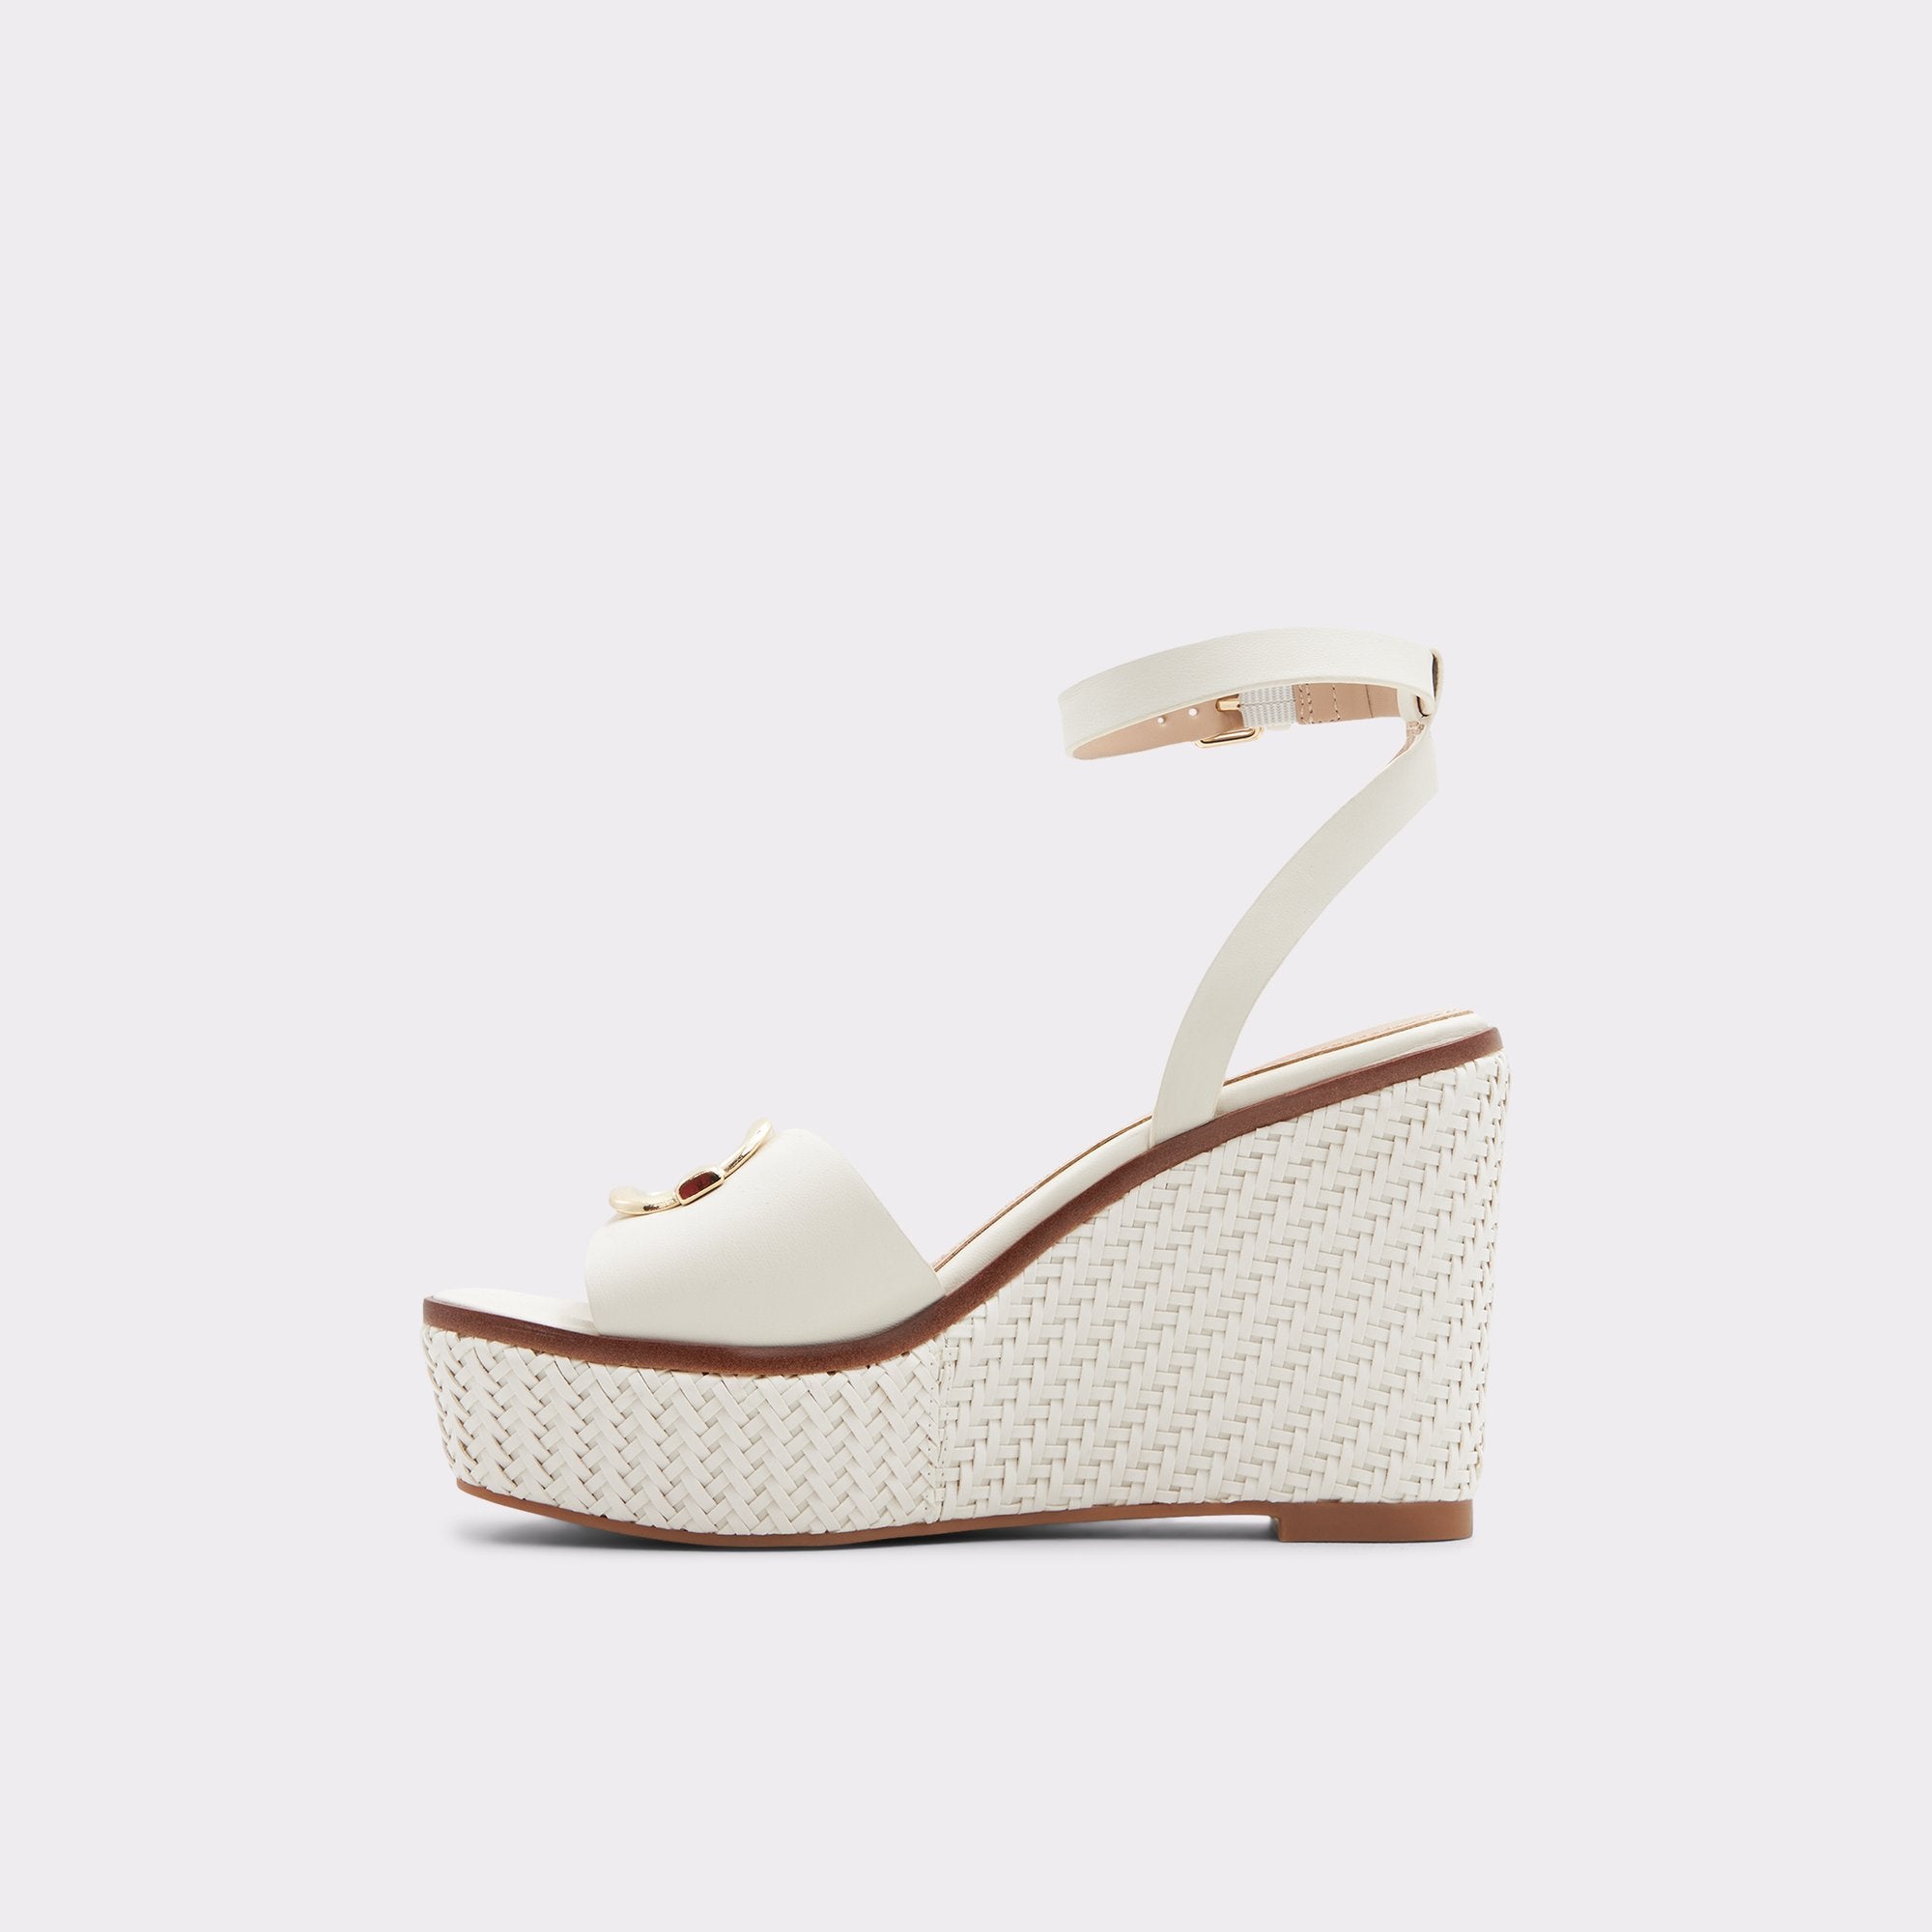 ALDO TAPPED GOLD EMBELLISHED WEDGE SANDAL IN OFF WHITE